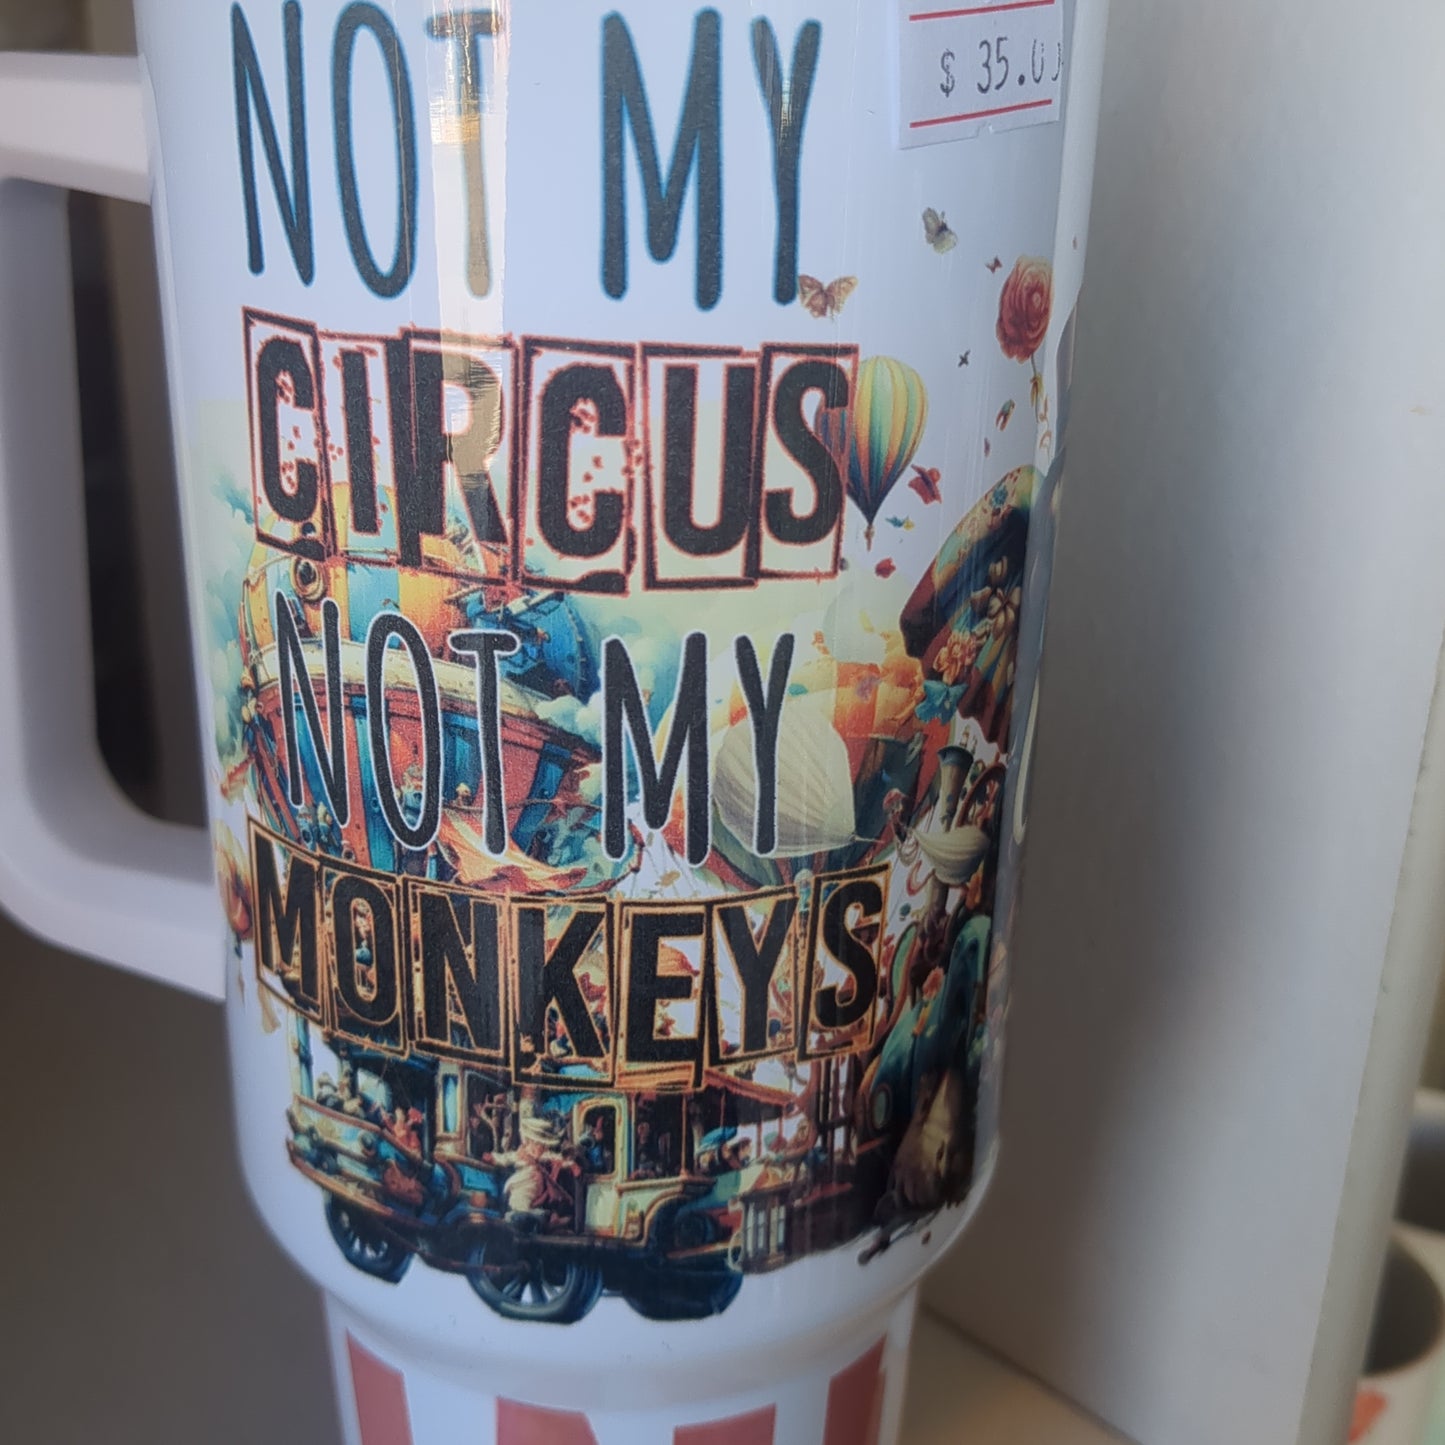 40 oz stainless steel insulated tumbler. Not my circus, not my monkeys this one has flaws.